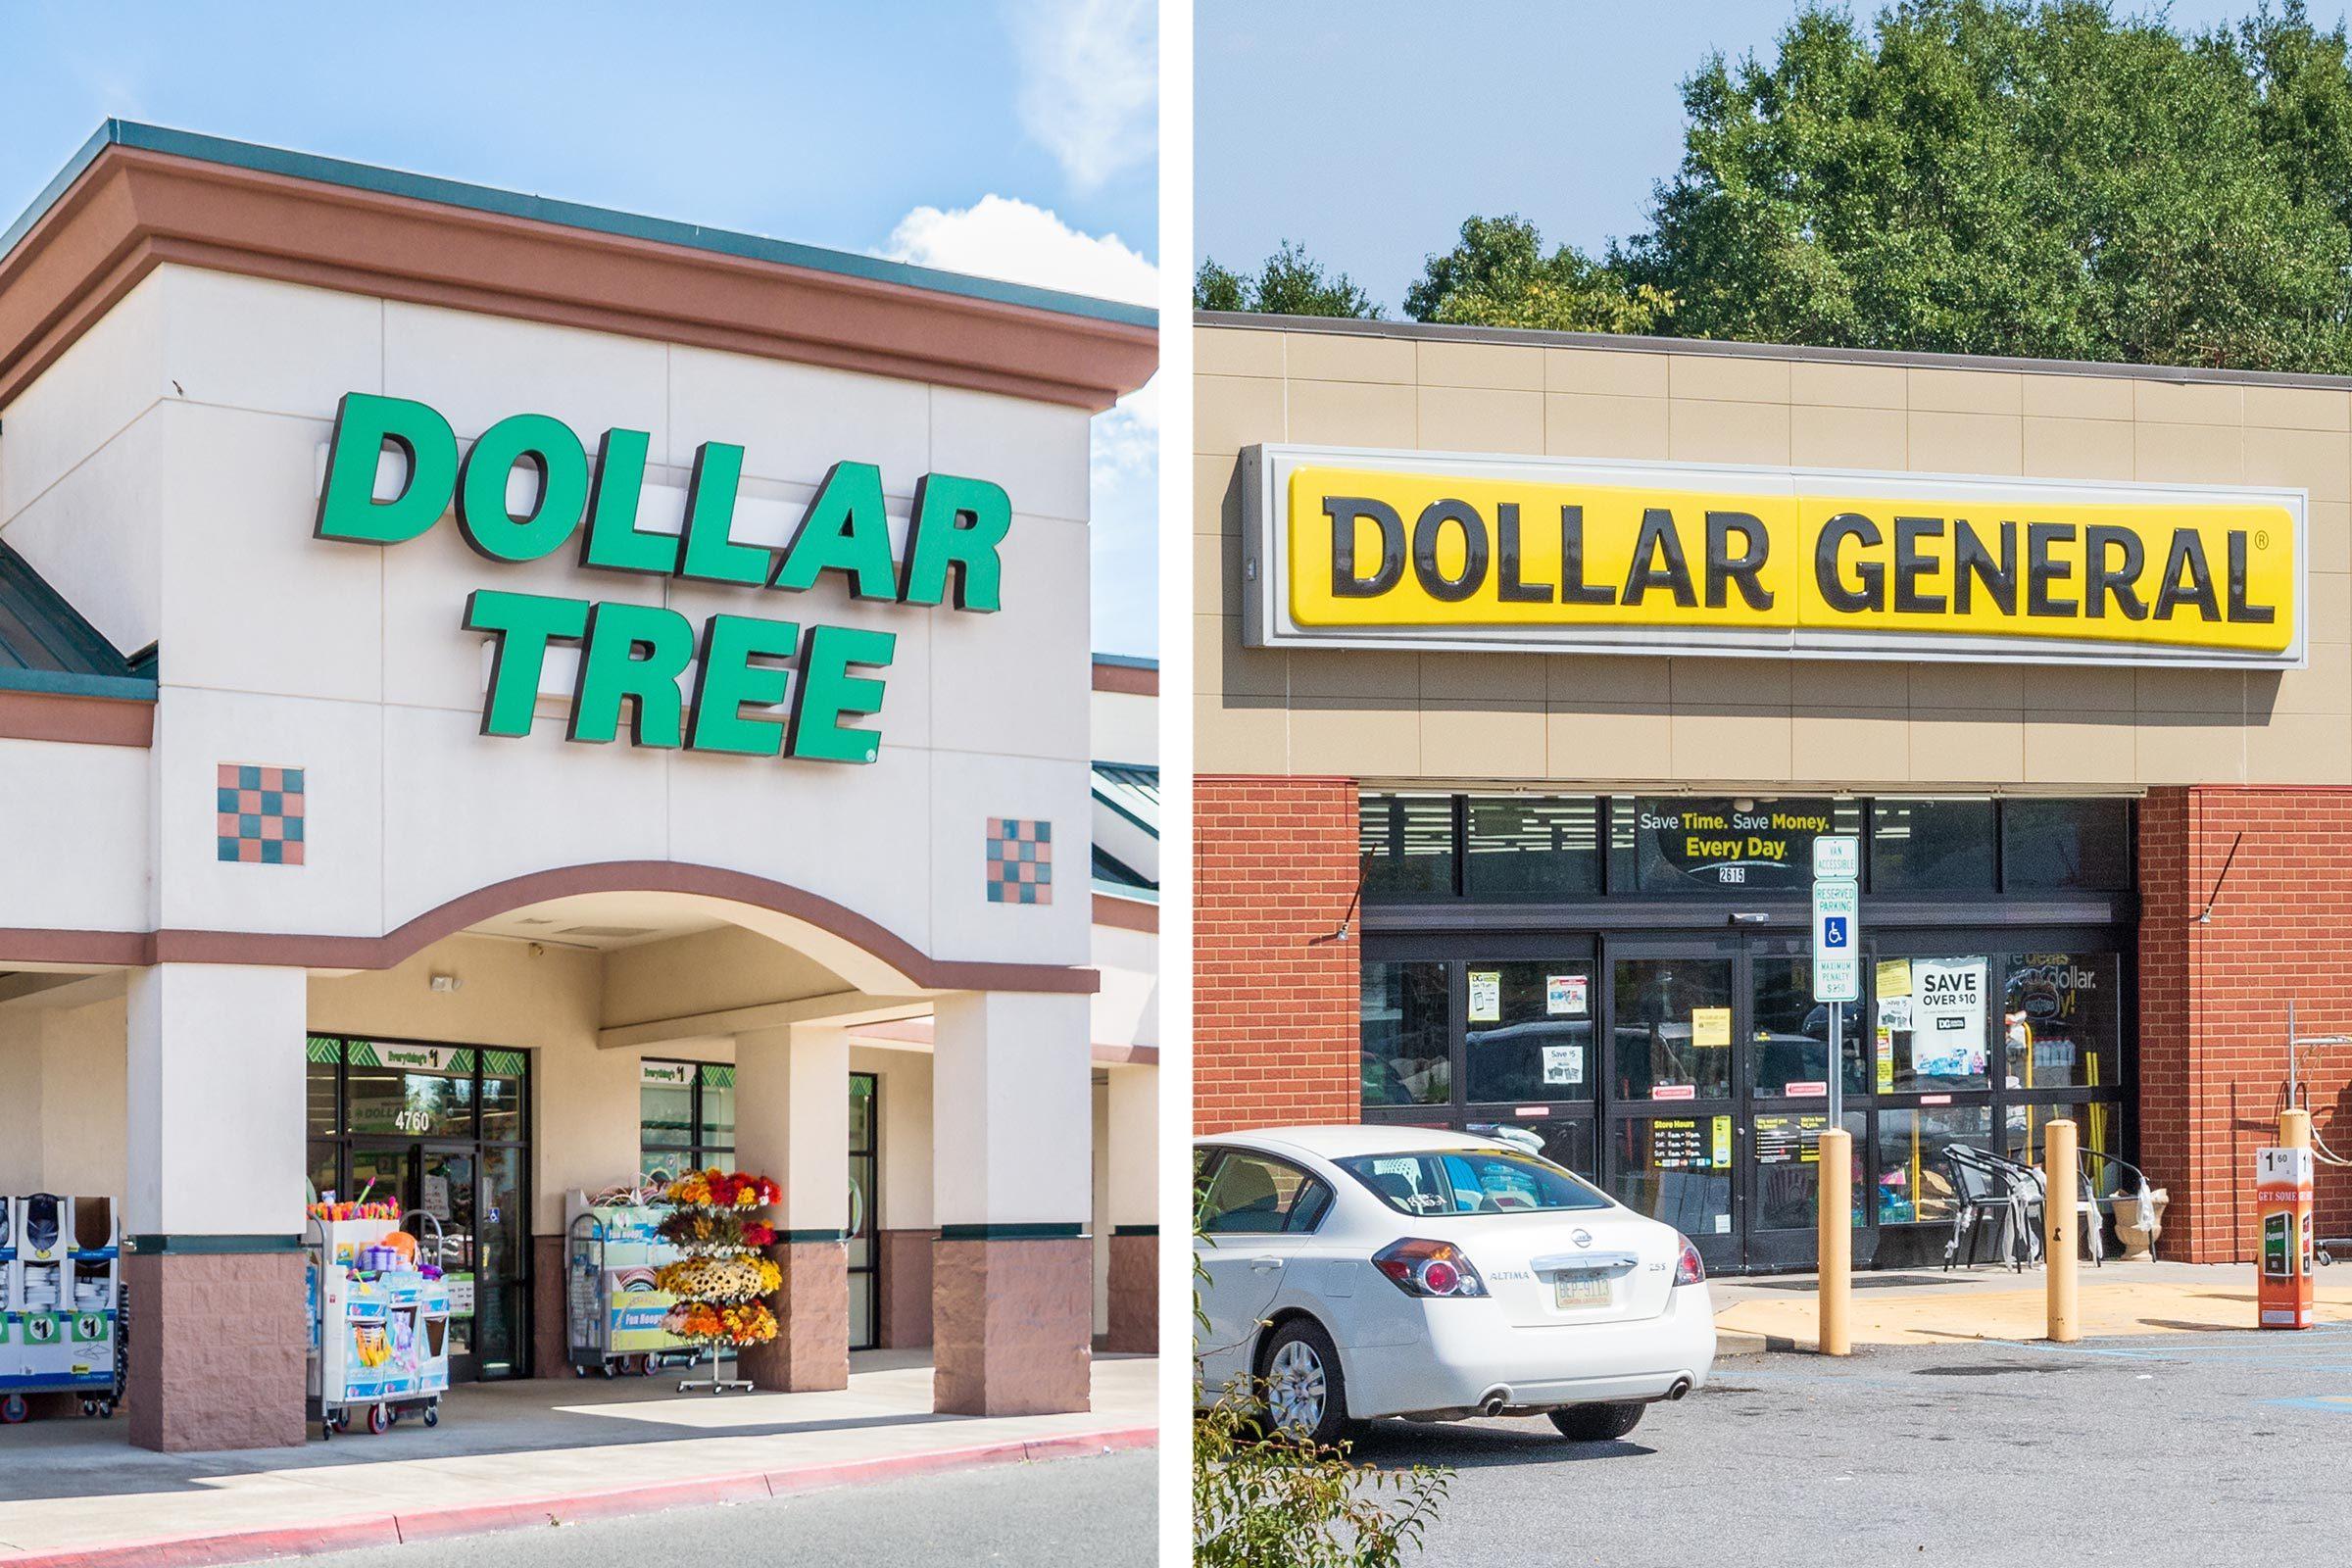 10 Genius Dollar Tree Items You Never Knew You Needed